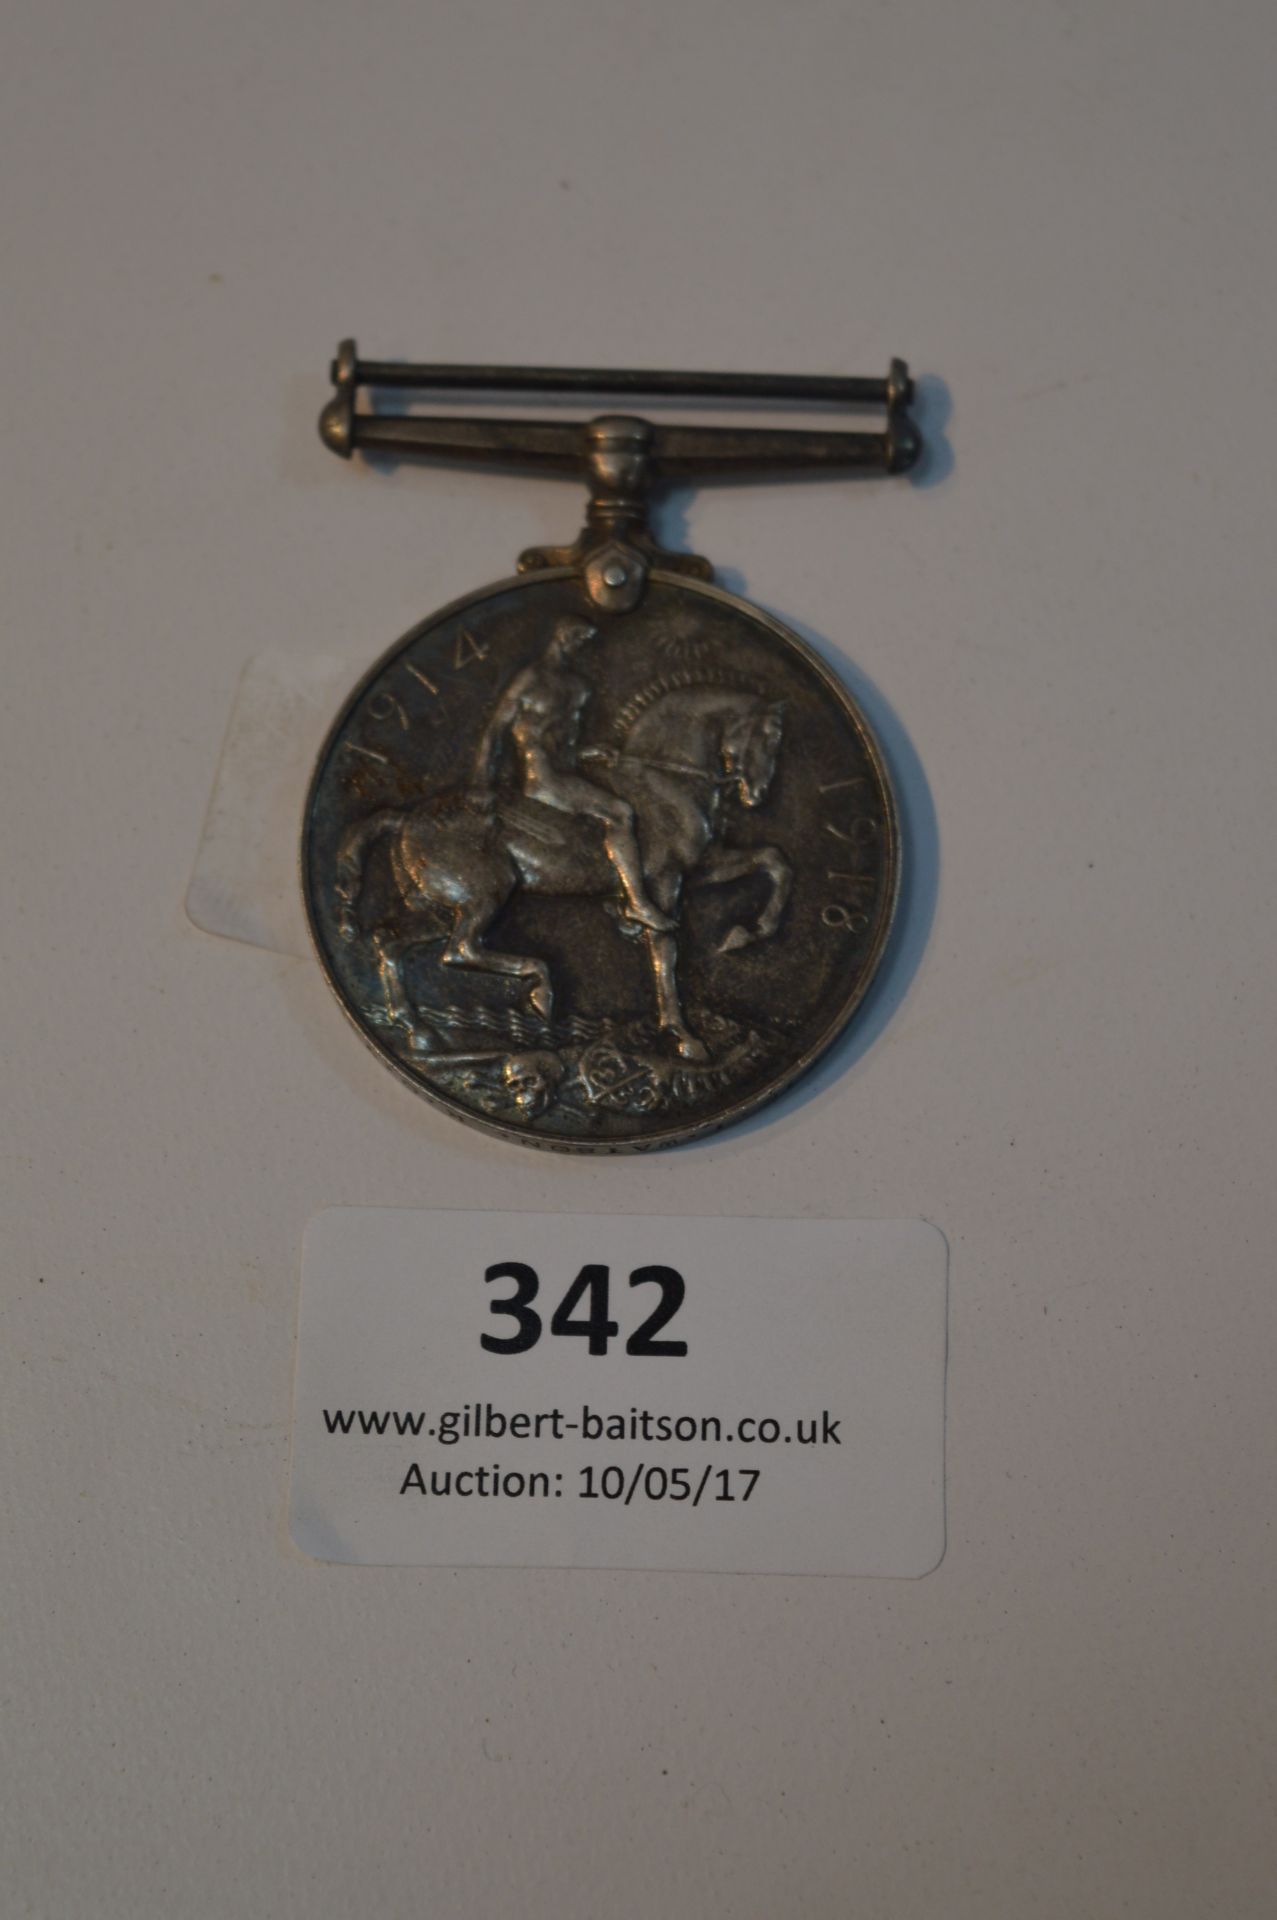 WWI Service Medal Awarded to "T. Watson Coyli"